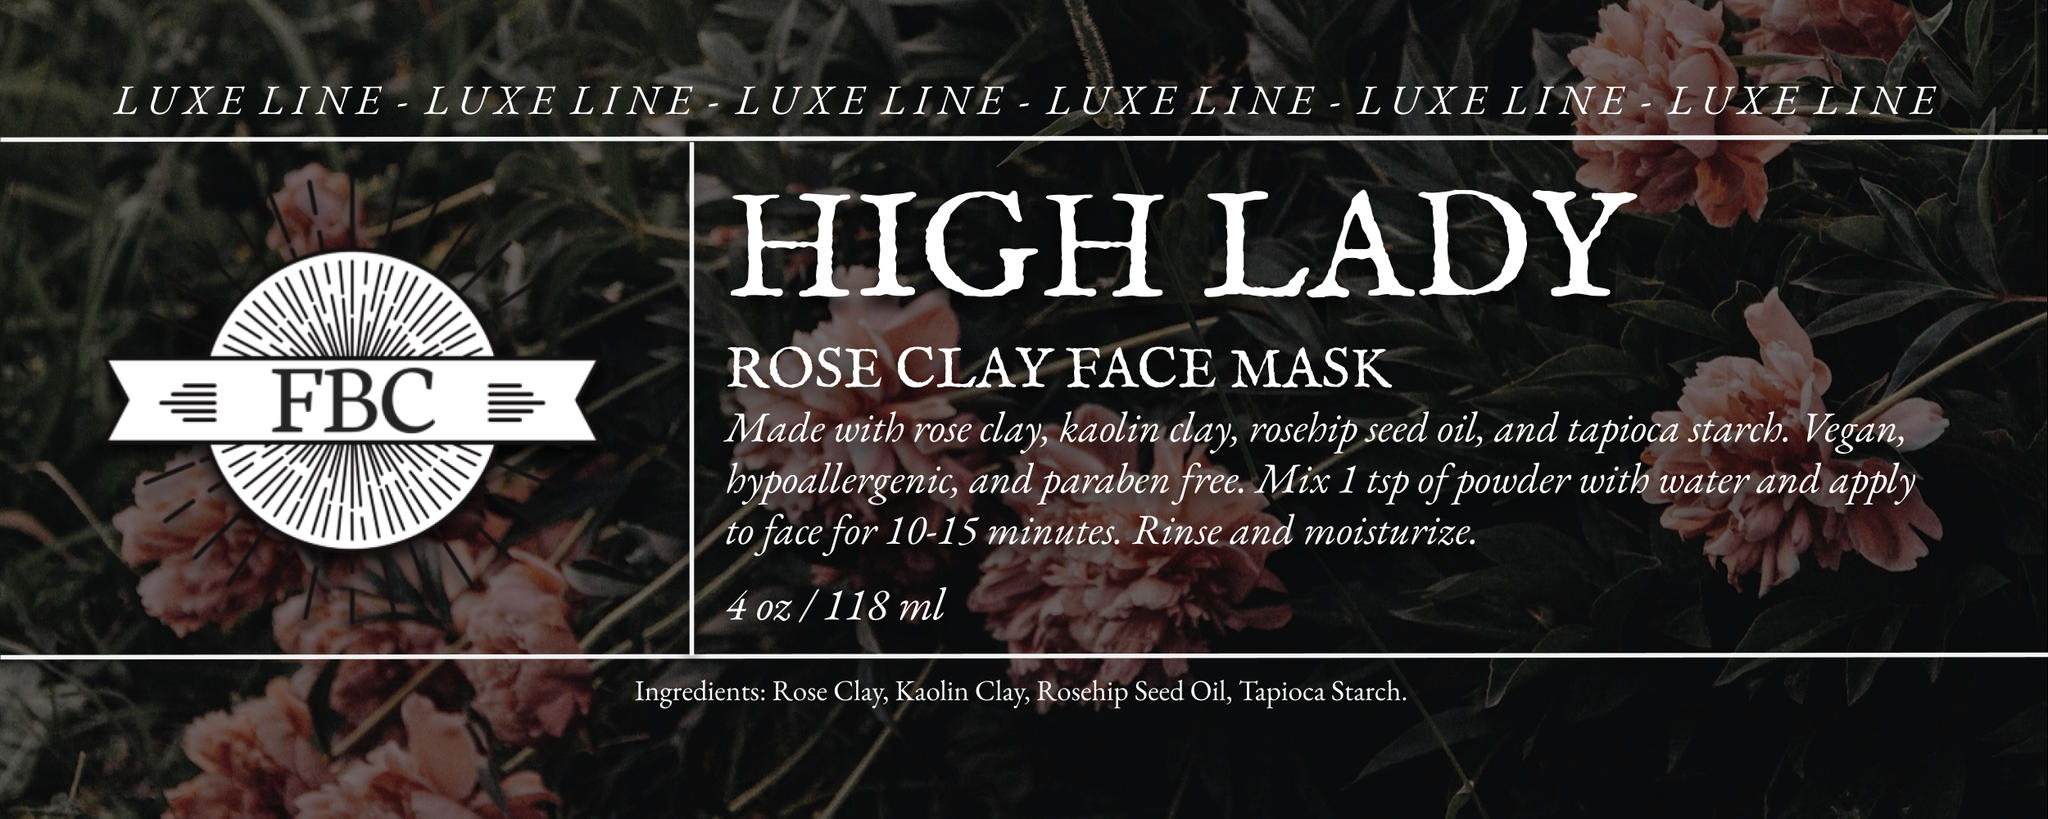 LUXE LINE: High Lady Rose Clay Face Mask (4oz)